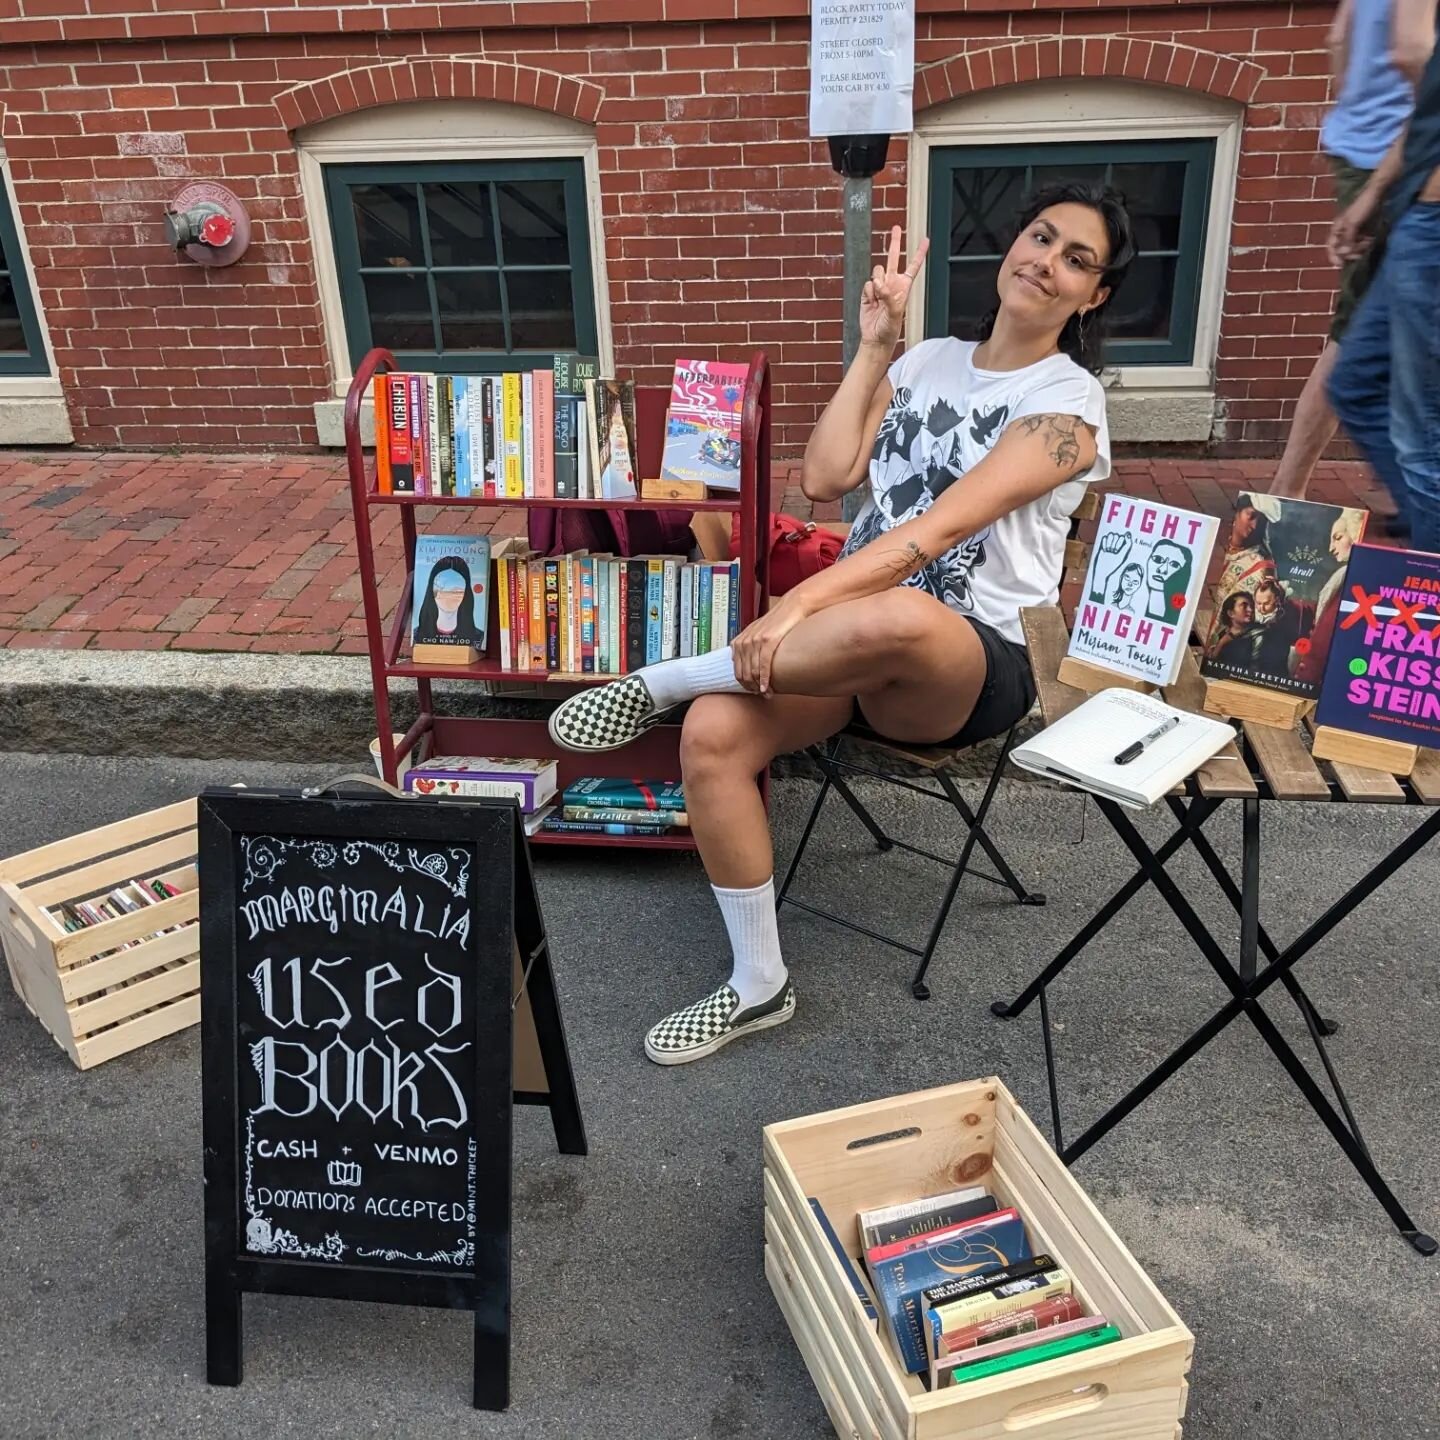 many many thanks to @faro__cafe for hosting such a wondering community event and to everybody &mdash; friends, passerby, neighbors &mdash; who came out to support our first day as a pop-up bookstore 🖤